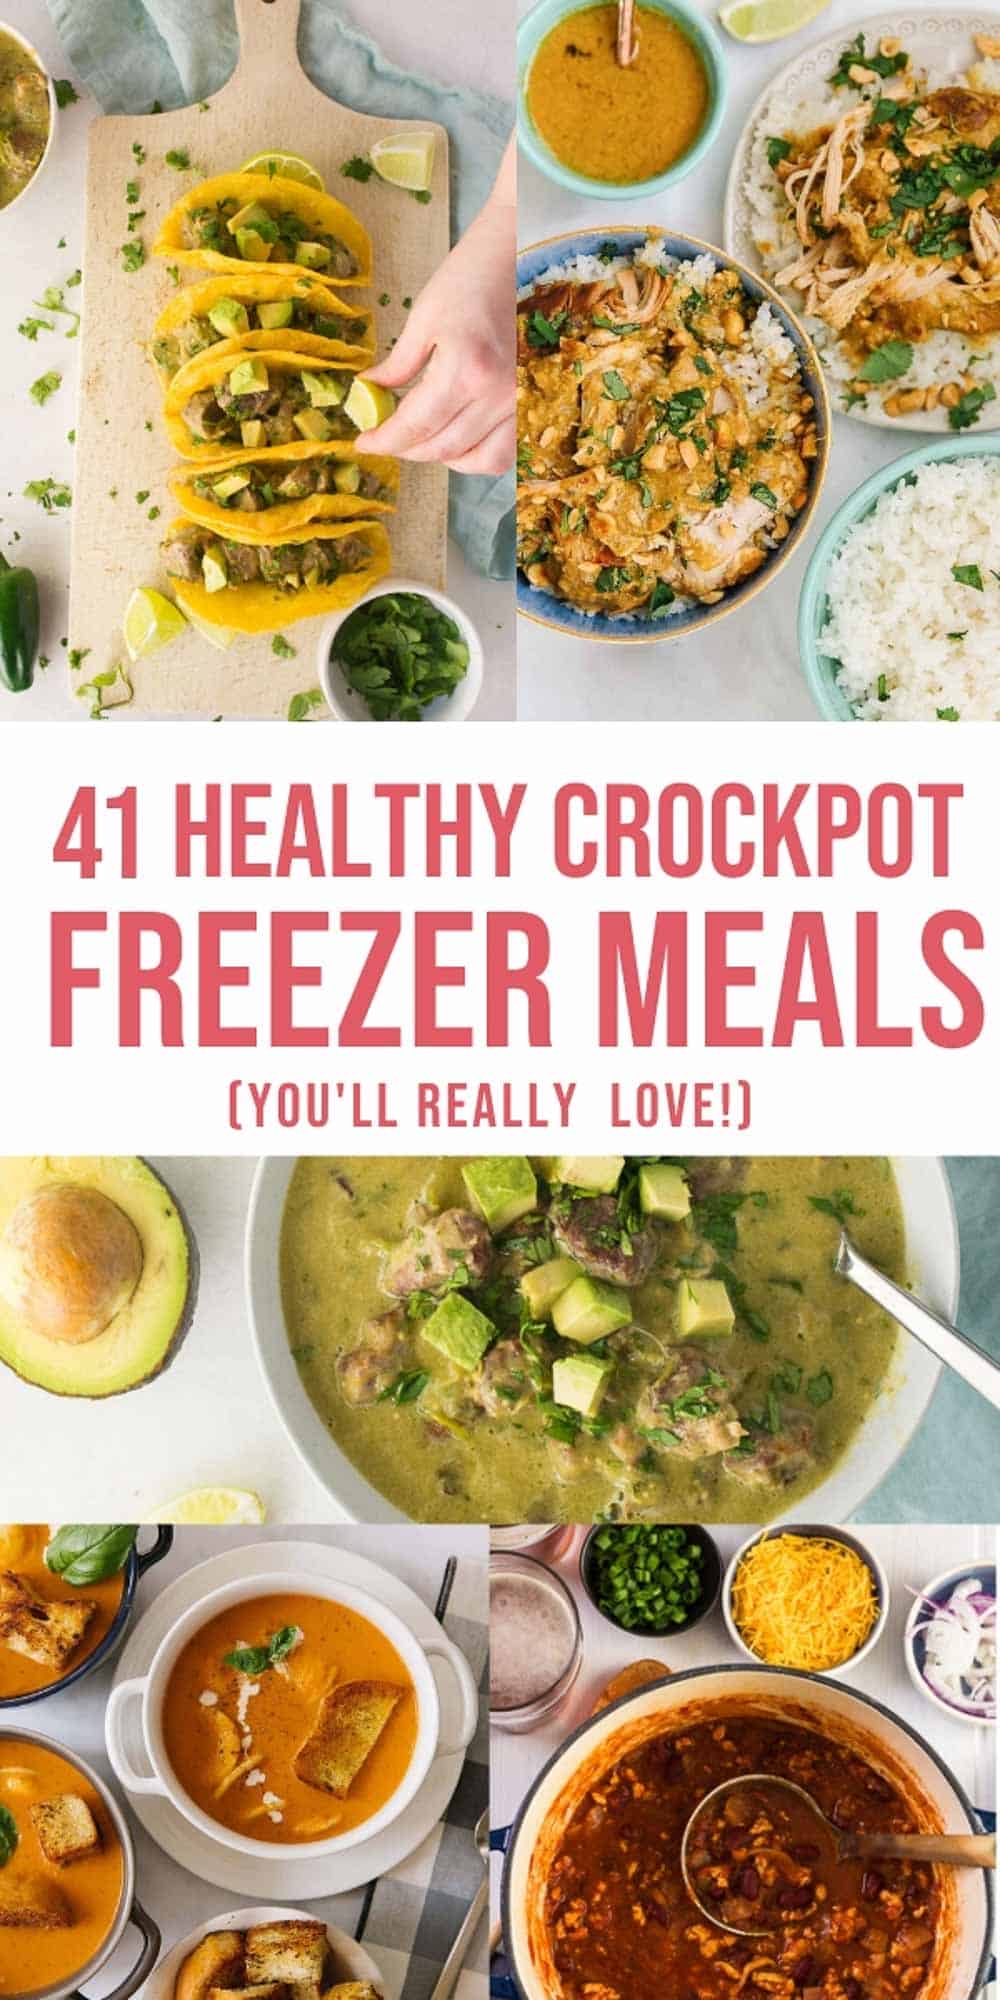 41 Healthy Crockpot Freezer Meals you'll really love with pictures of slow cooker freezer meals. 